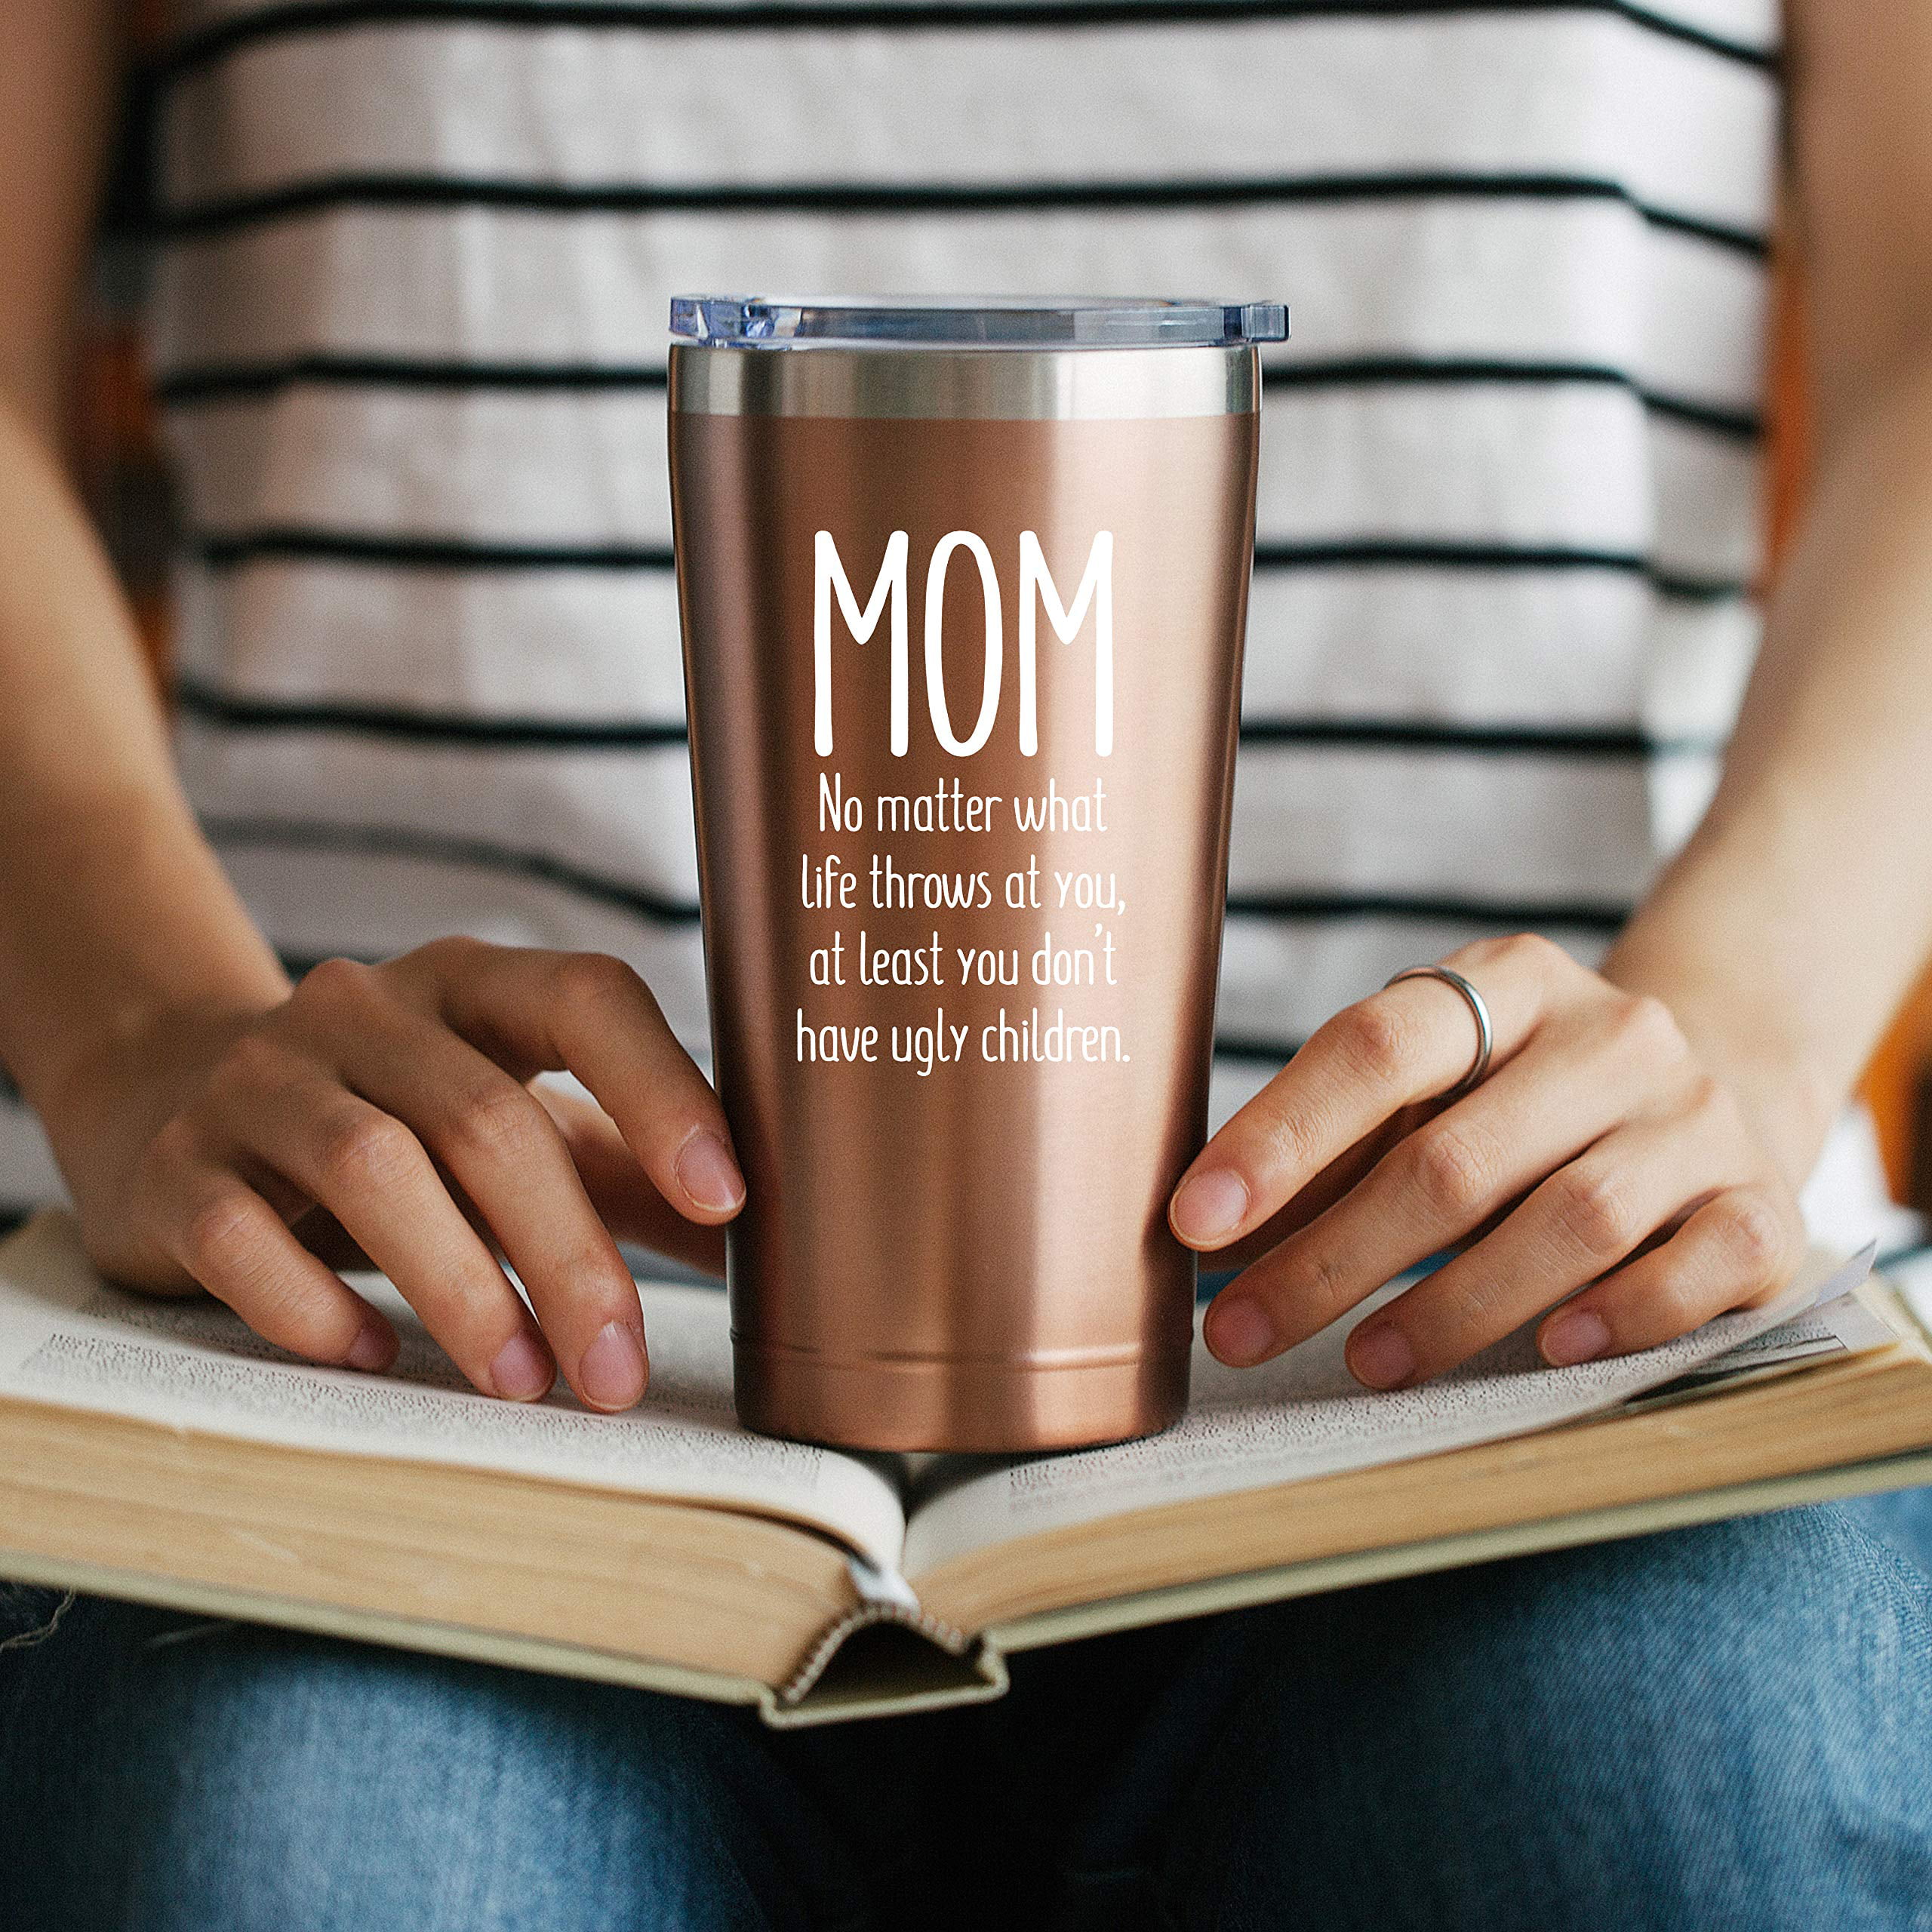 Birthday Mothers Day Christmas Gift Ideas from Daughter Son Mother Moms Madre Gifts Idea Kid Children Ugly Children Mom 16 oz Mint Insulated Stainless Steel Tumbler w//Lid Mug Cup for Women